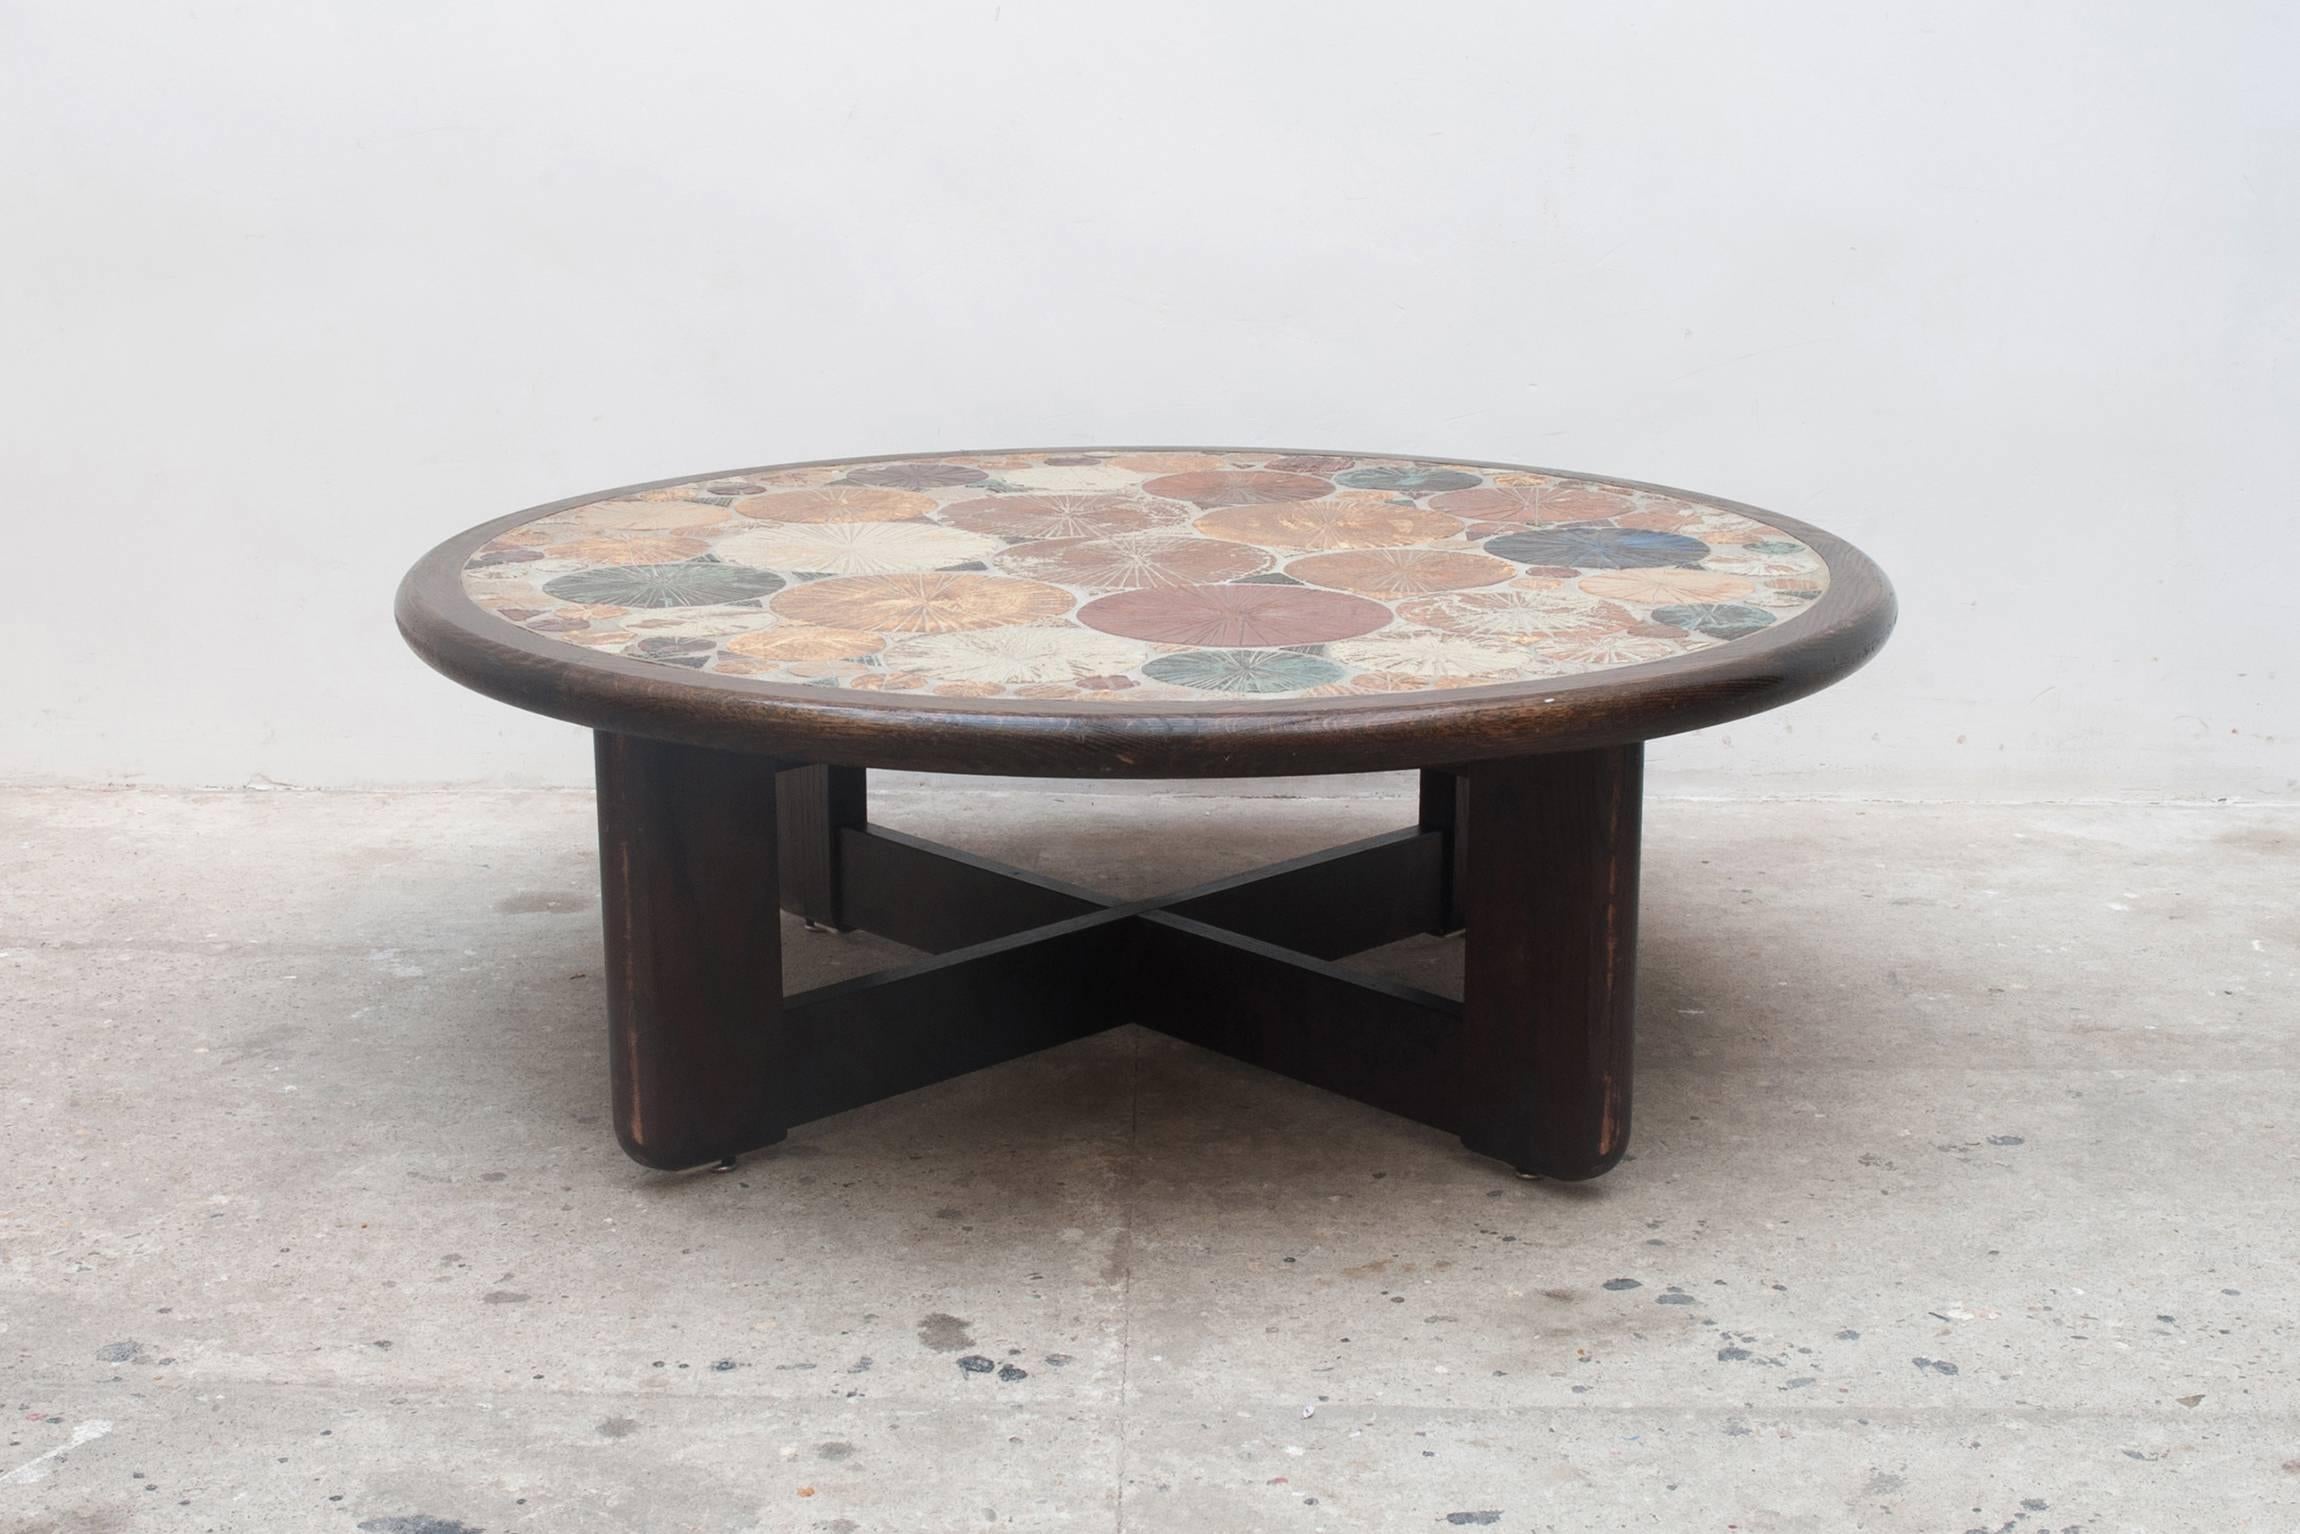 Large round ceramic coffee table was designed by Tue Poulsen in 1963, and was manufactured in Denmark by Haslev Møbelsnedkeri. The table has a dark stained oak wooden edge and cross feet, features multiple colored blue, green brown, grey, white and